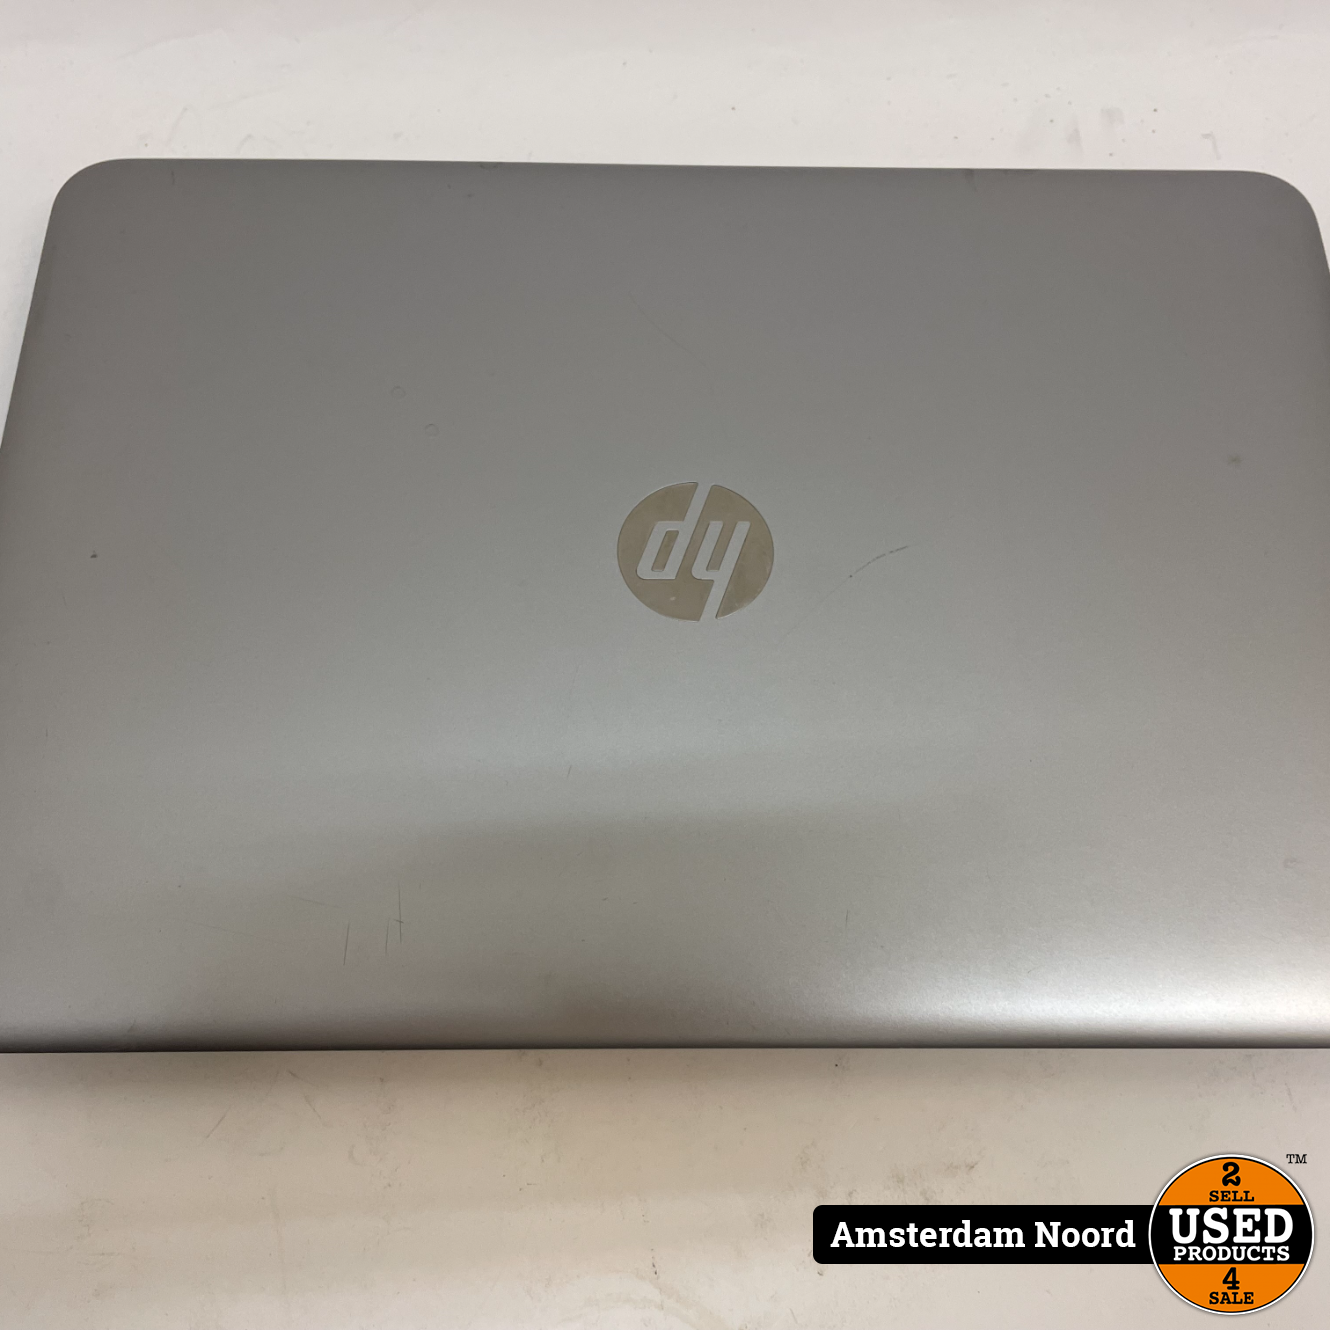 HP ProBook 450 G4 - 15.6FHD/i5-7200/8GB/256SSD/W10 - Used Products